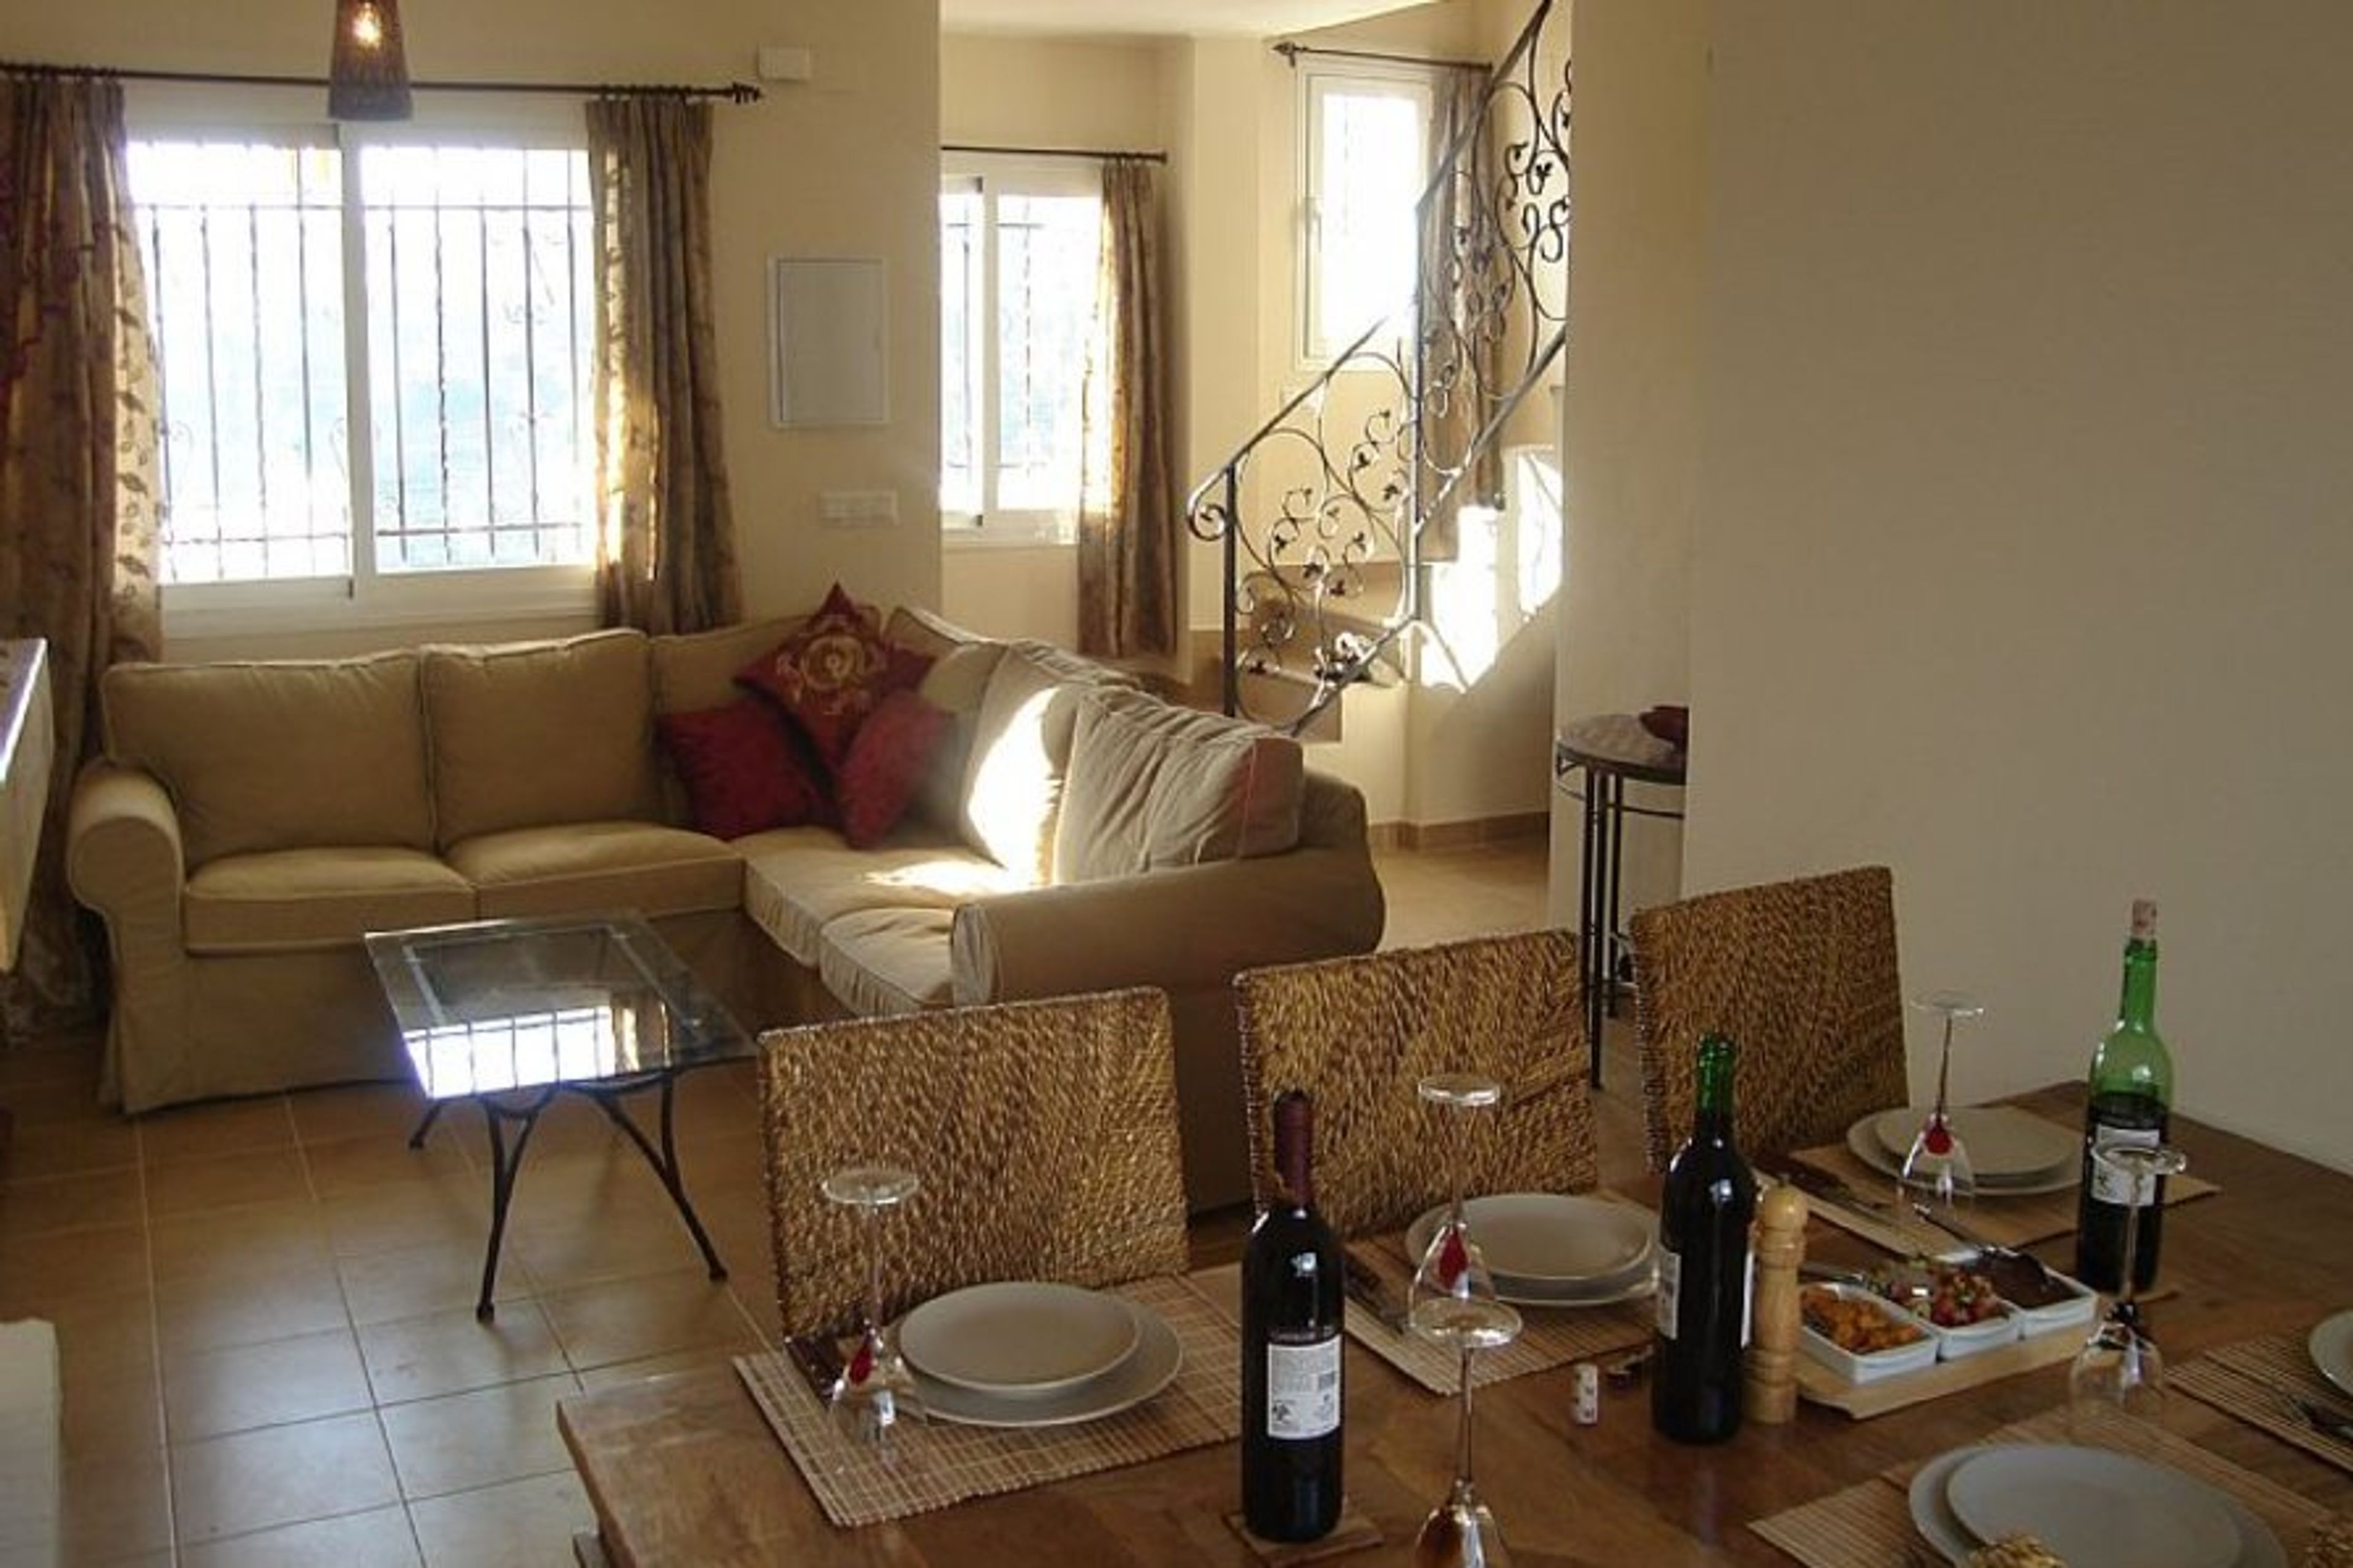 Airconditioned lounge with flat screen tv and free wifi. Dining area .